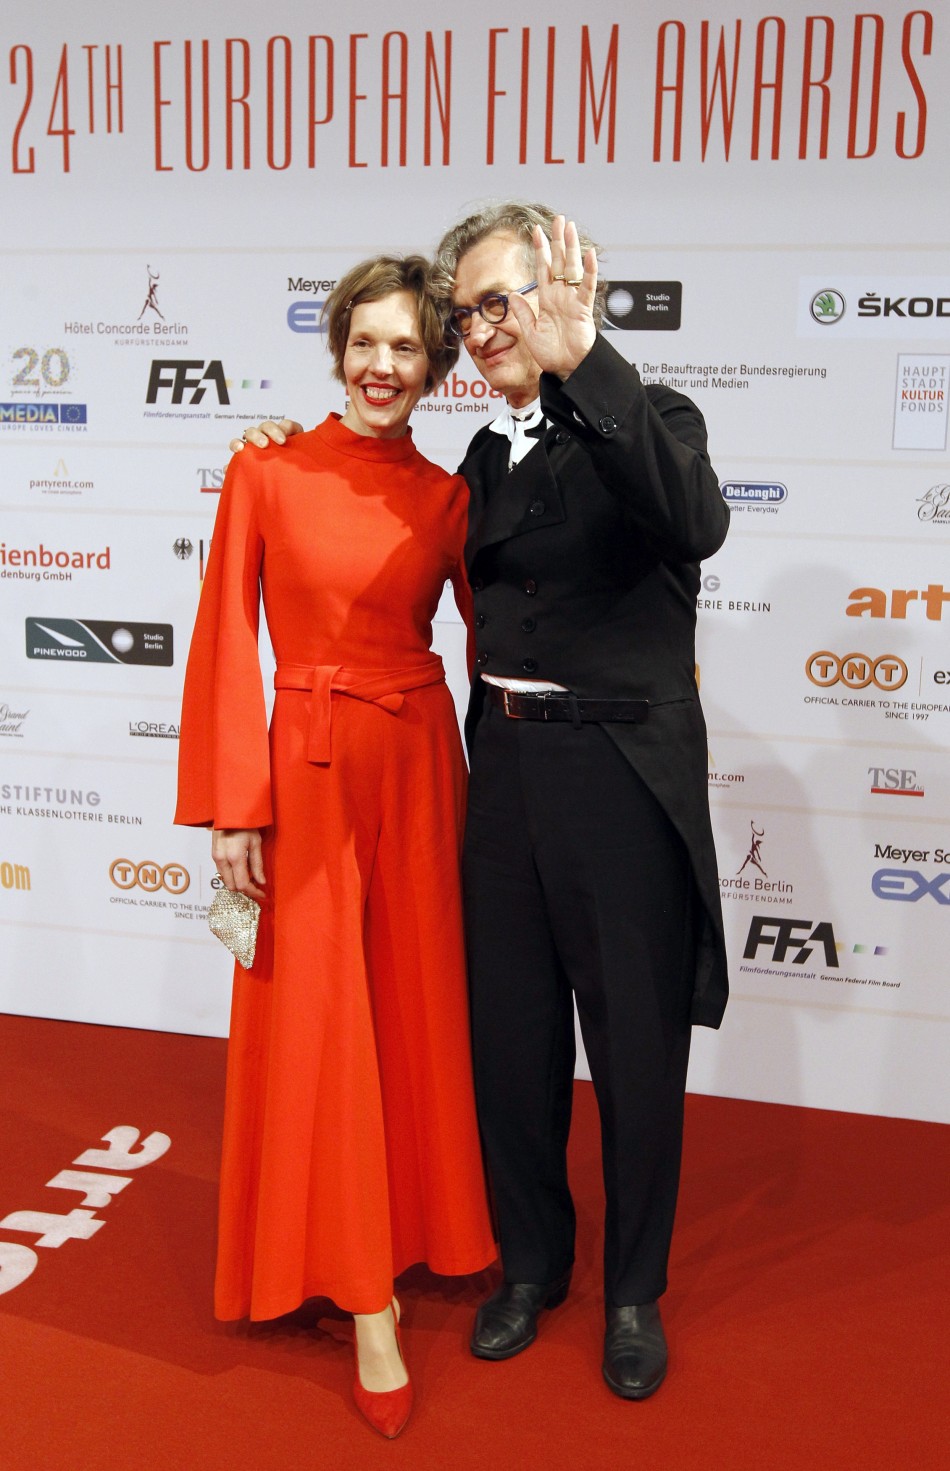 European Film Awards 2011 Winners, Celebrities and Red Carpet Arrivals